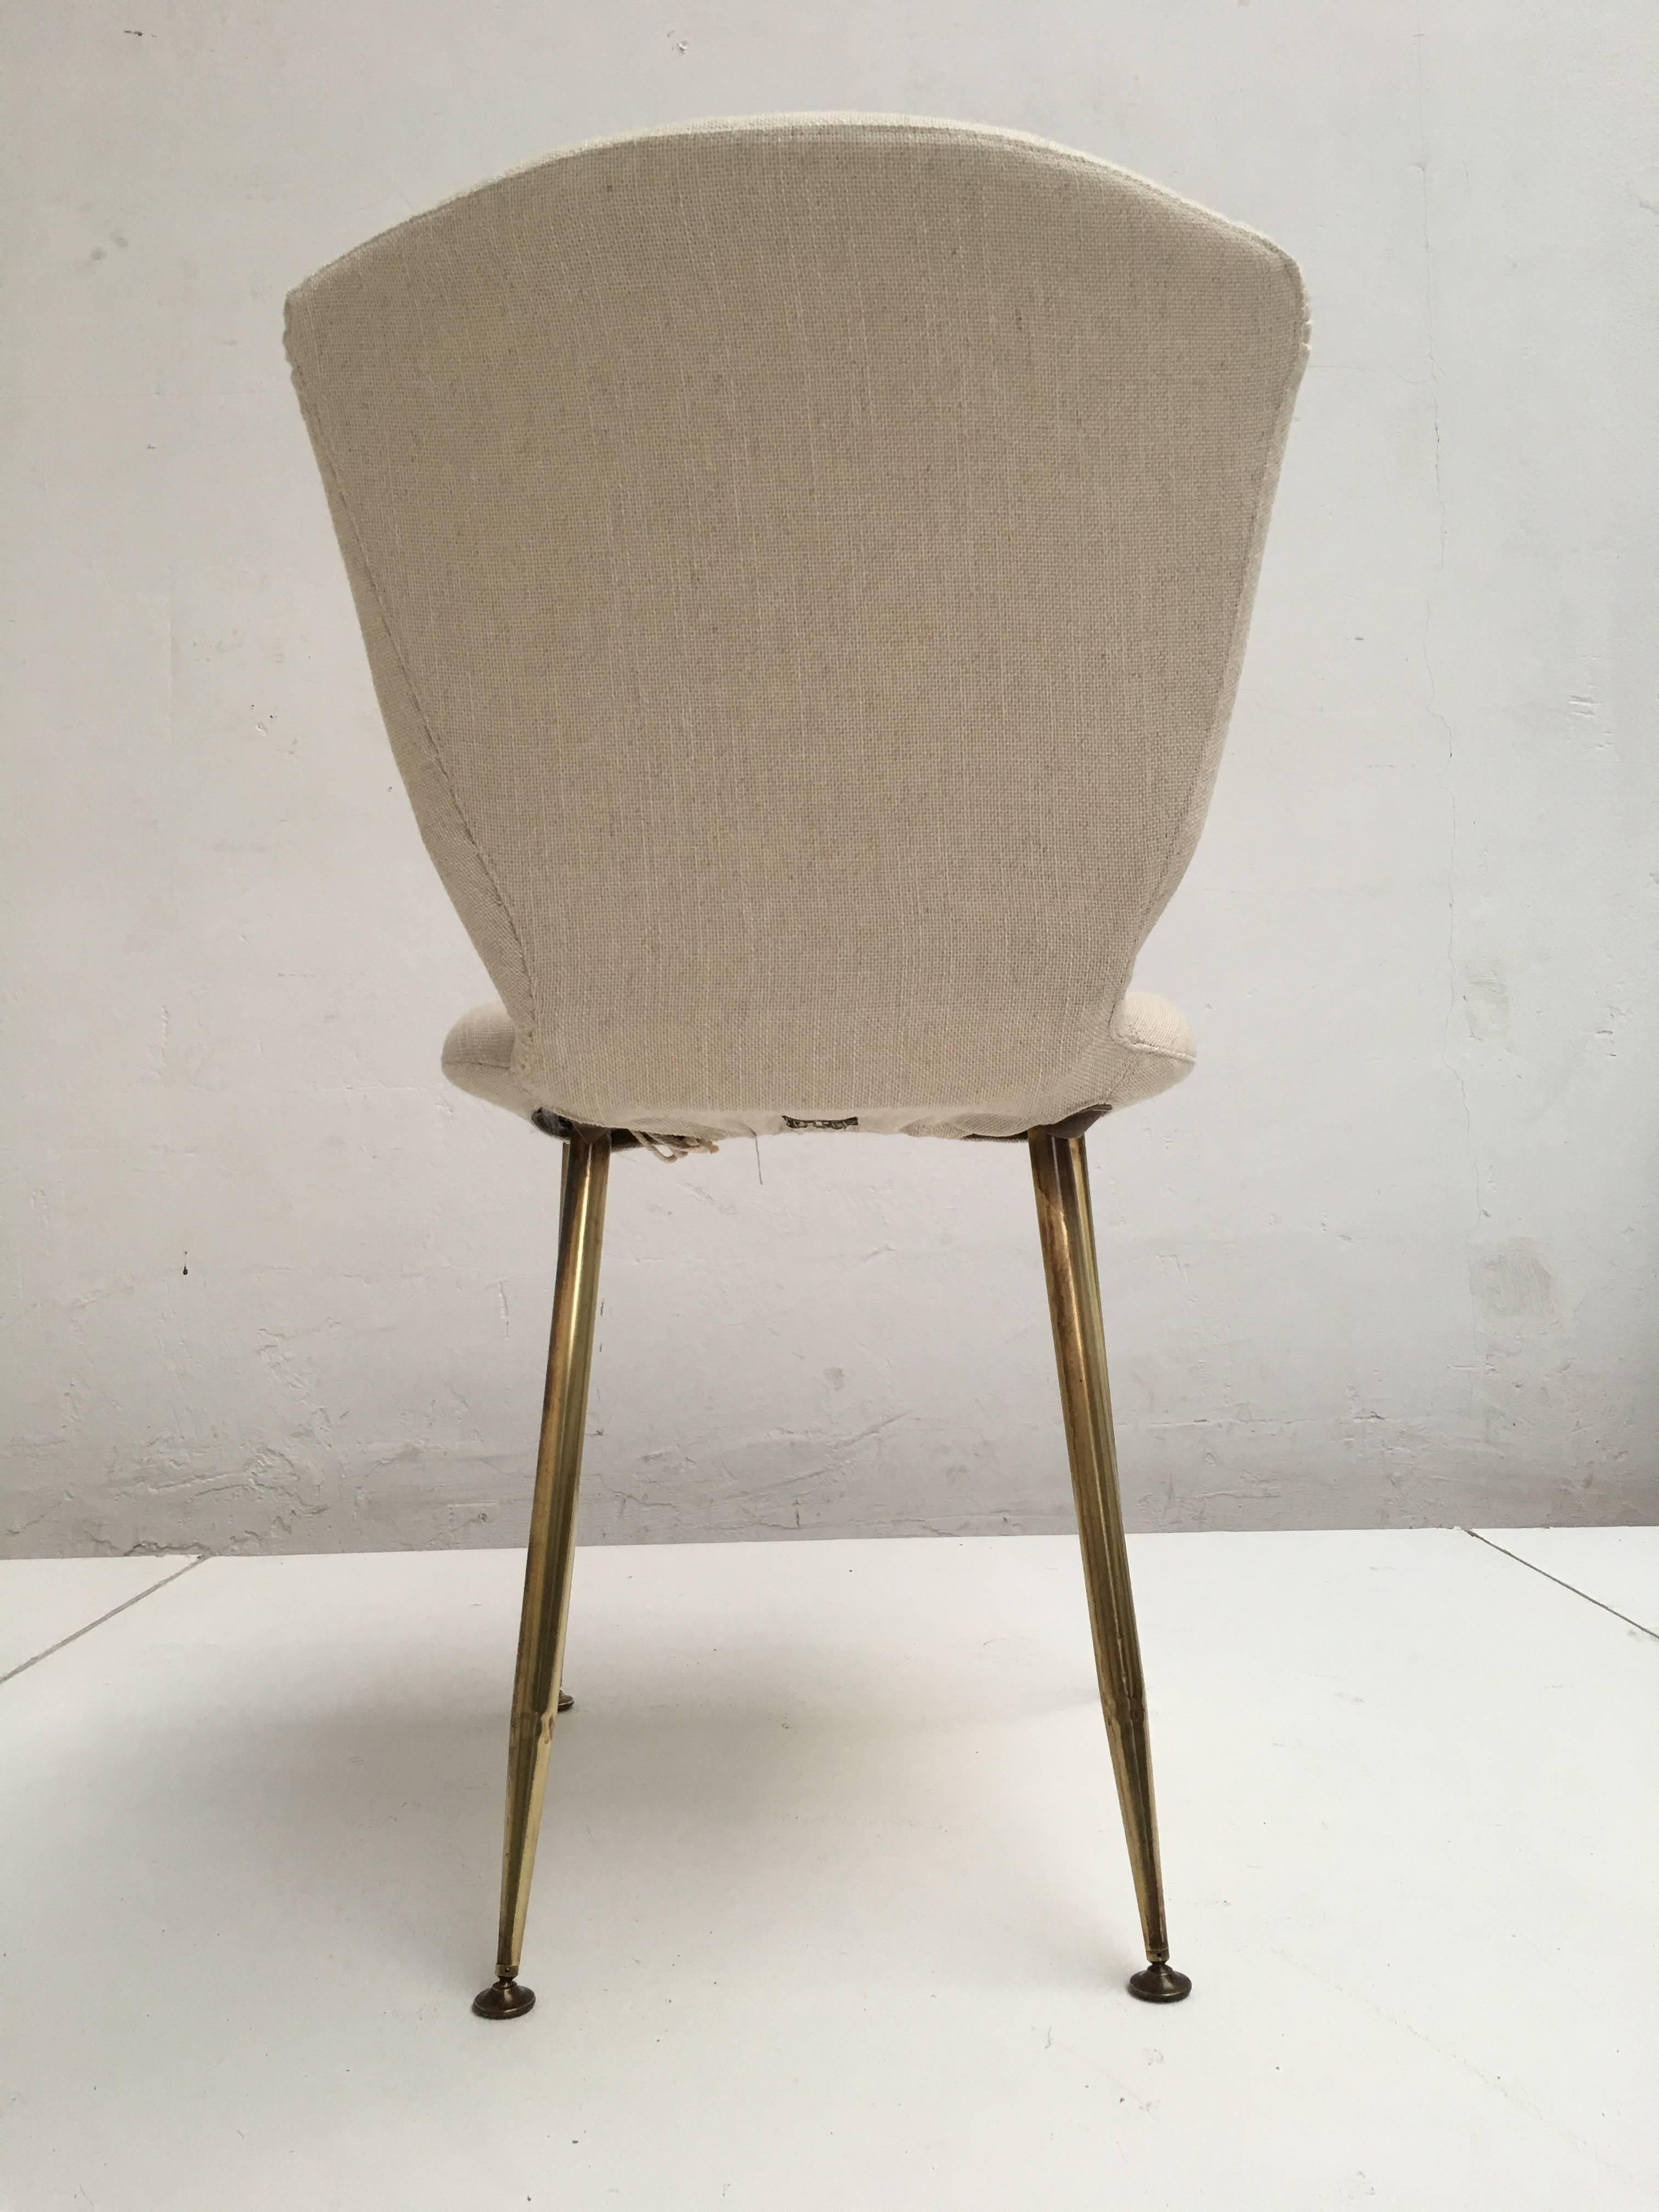 Mid-Century Modern Ten brass leg Dining Chairs by Louis Sognot for Arflex, Italy 1959. Published.